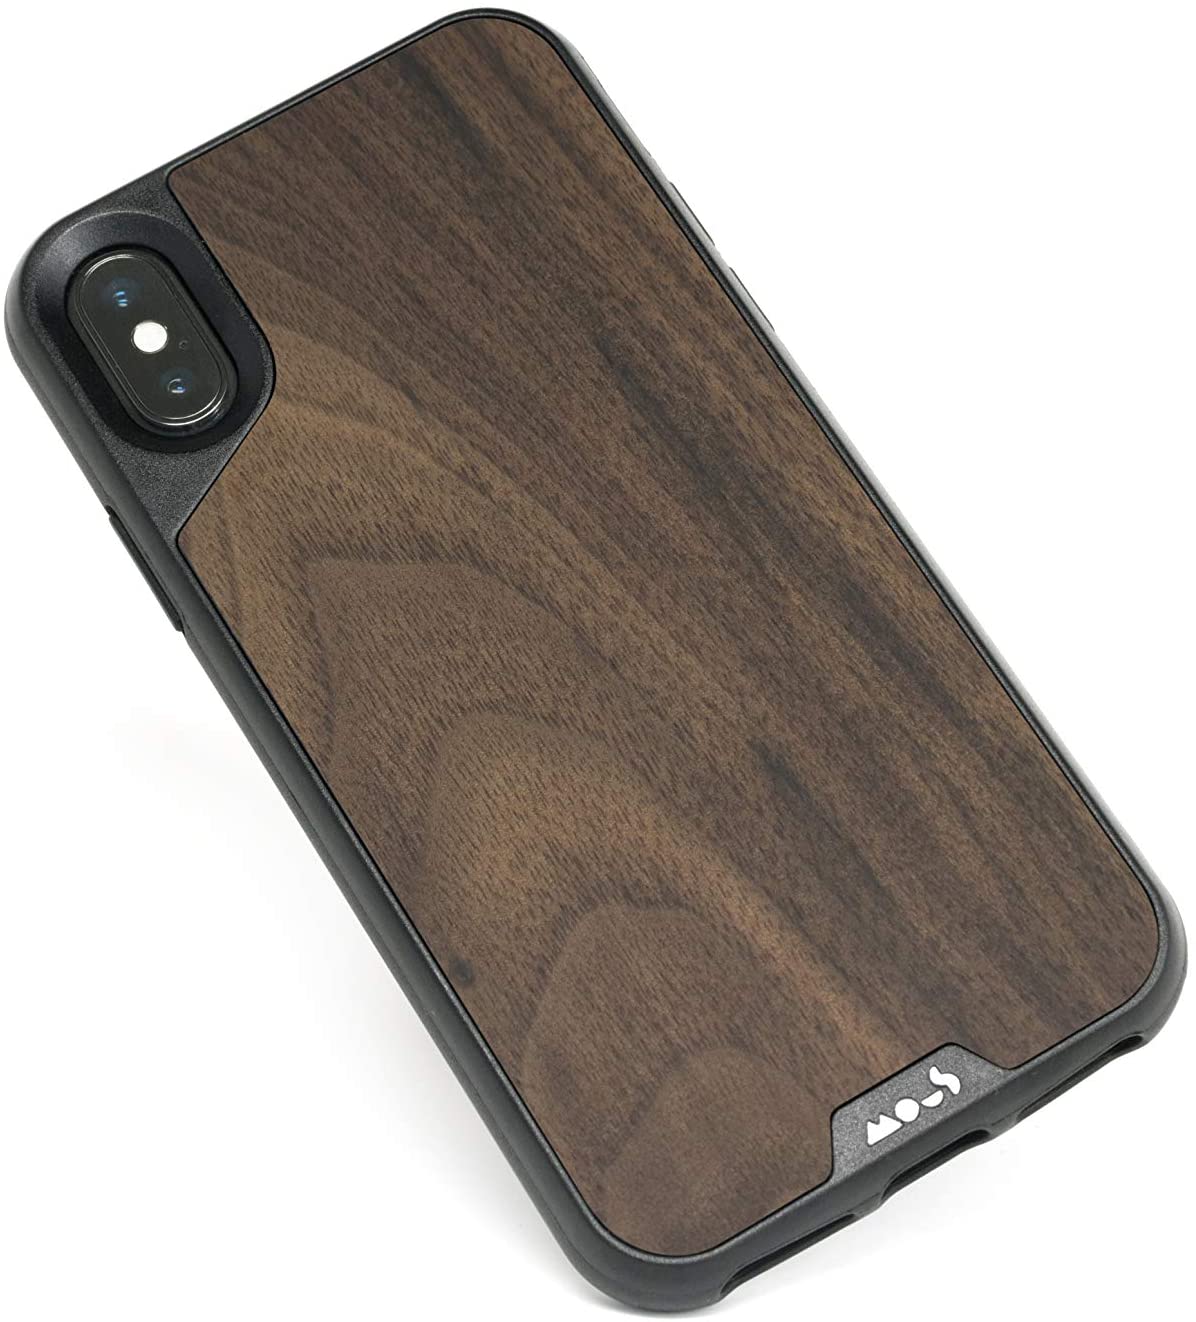 Mous   Protective Case For Iphone Xs Max   Limitless 2.0   Walnut